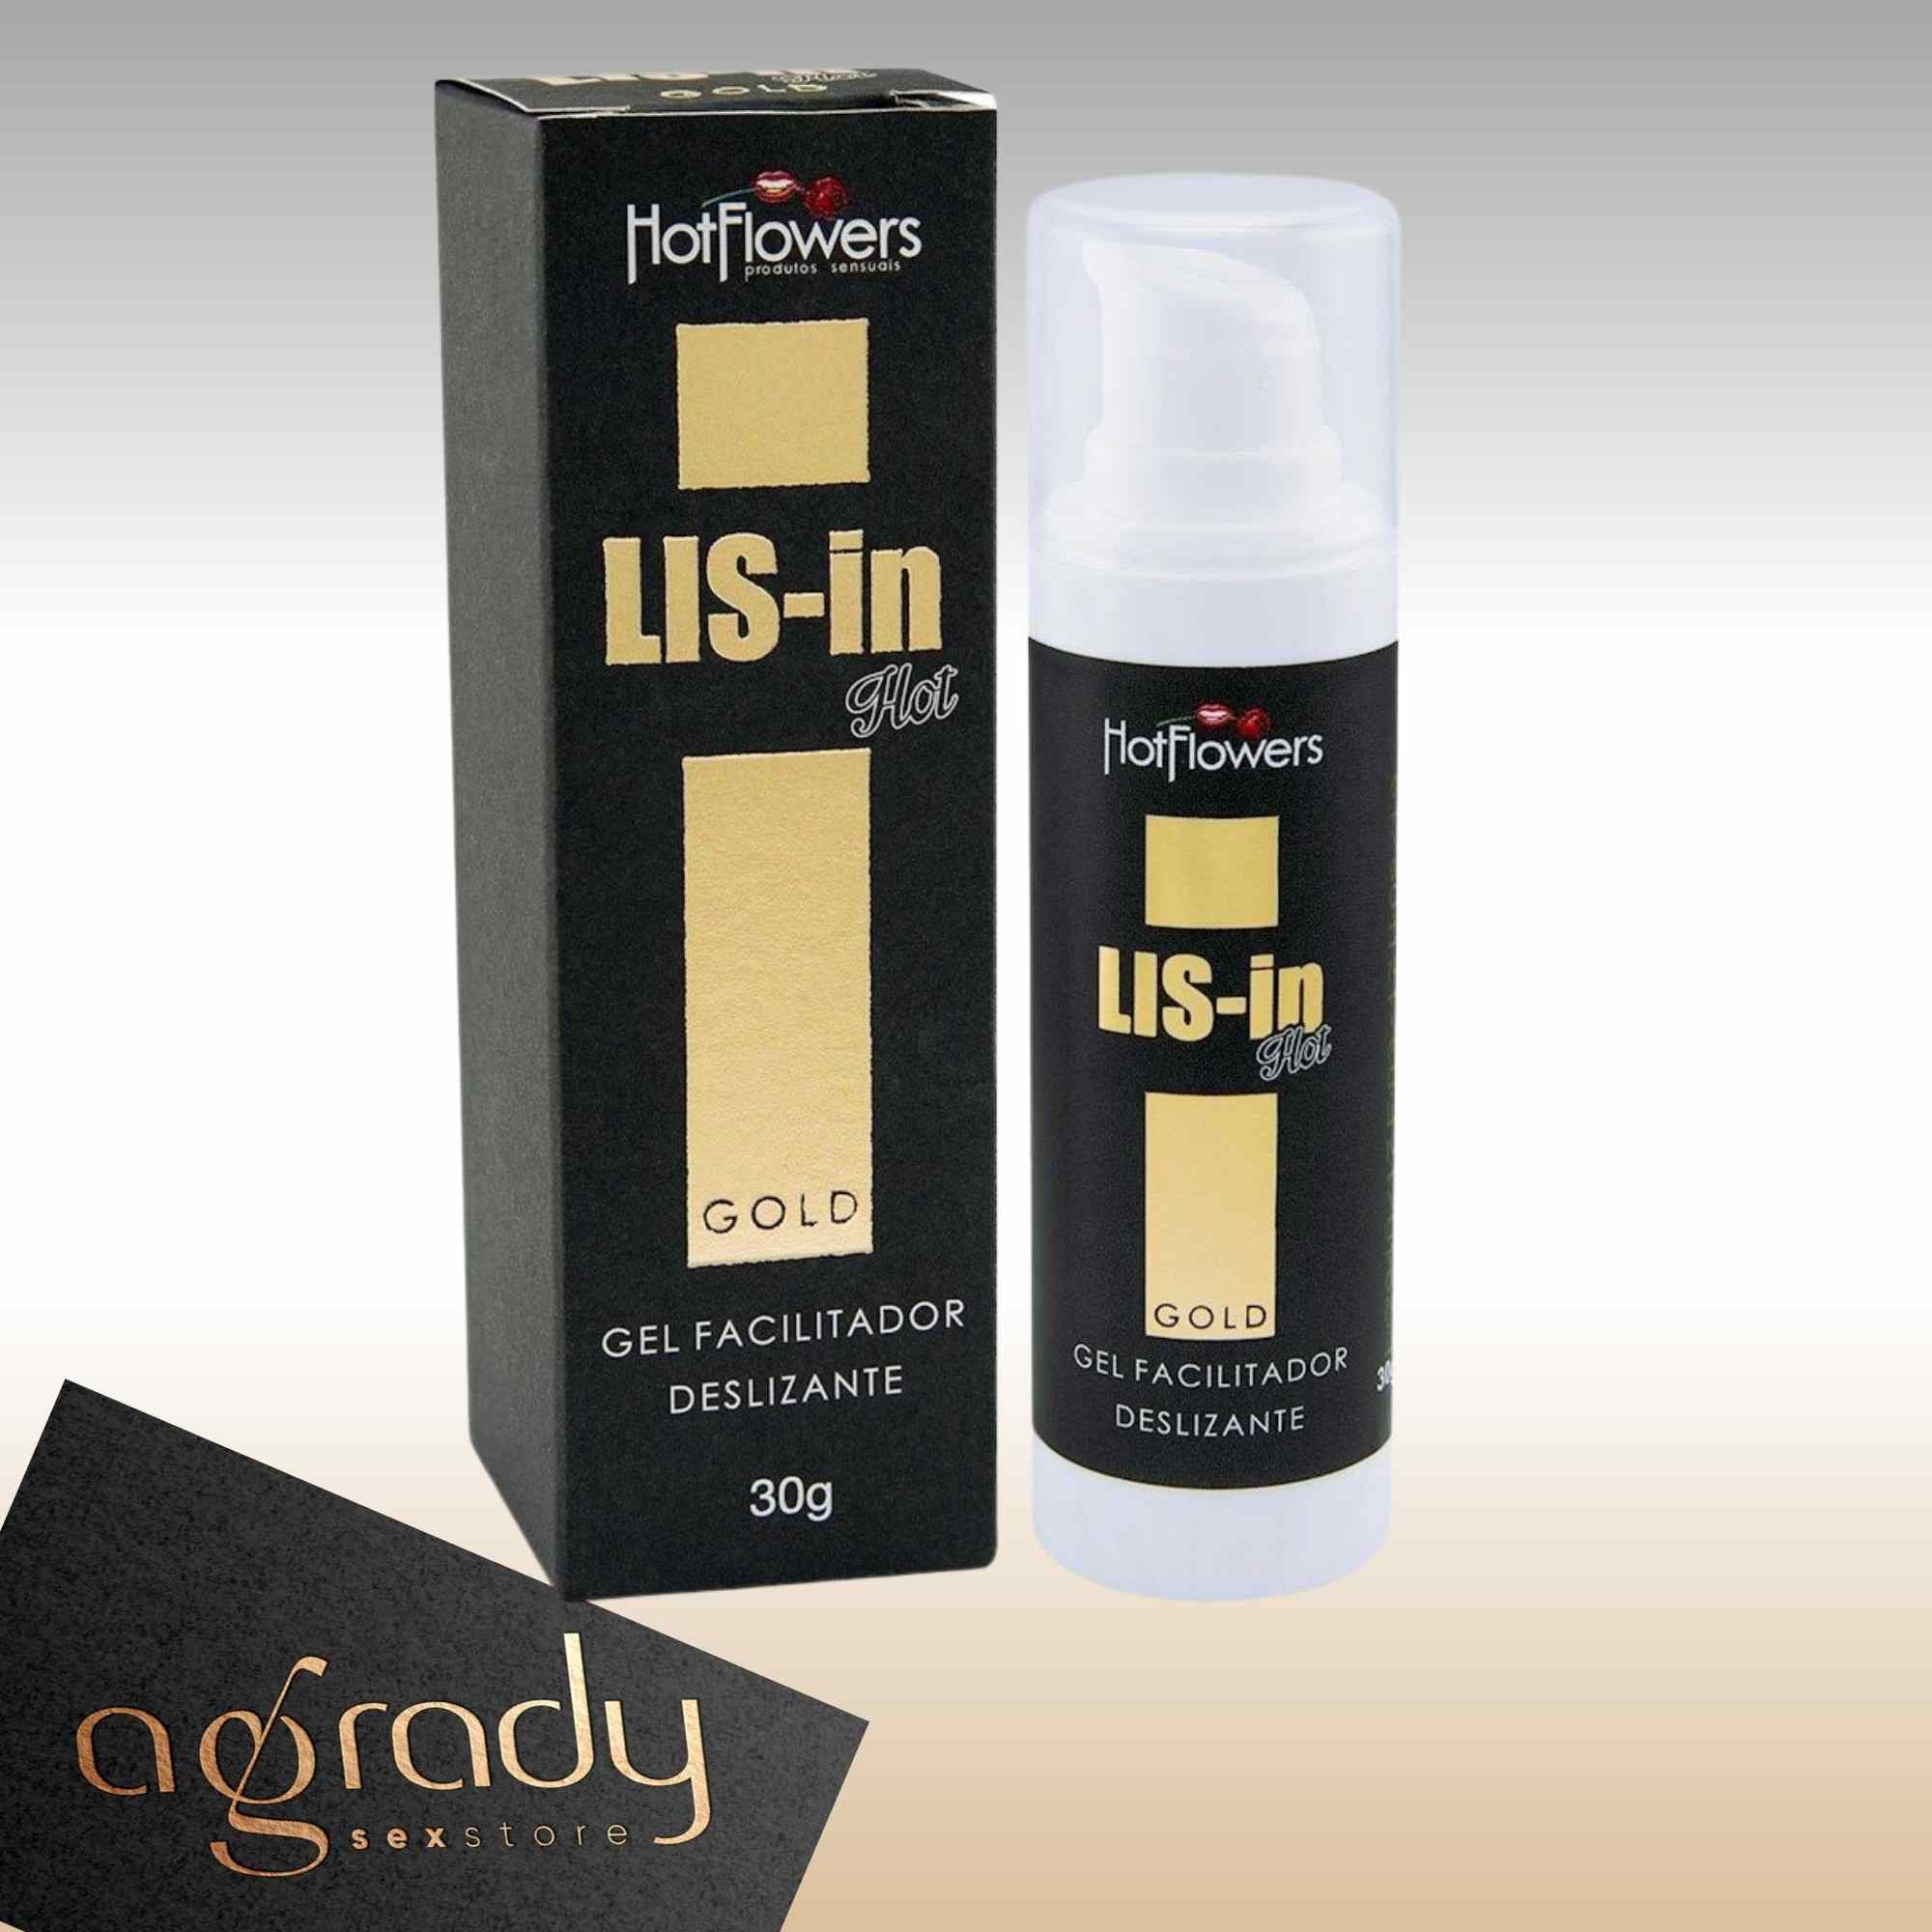 LIS-IN GOLD GEL ANAL 5X MAIS POTENTE